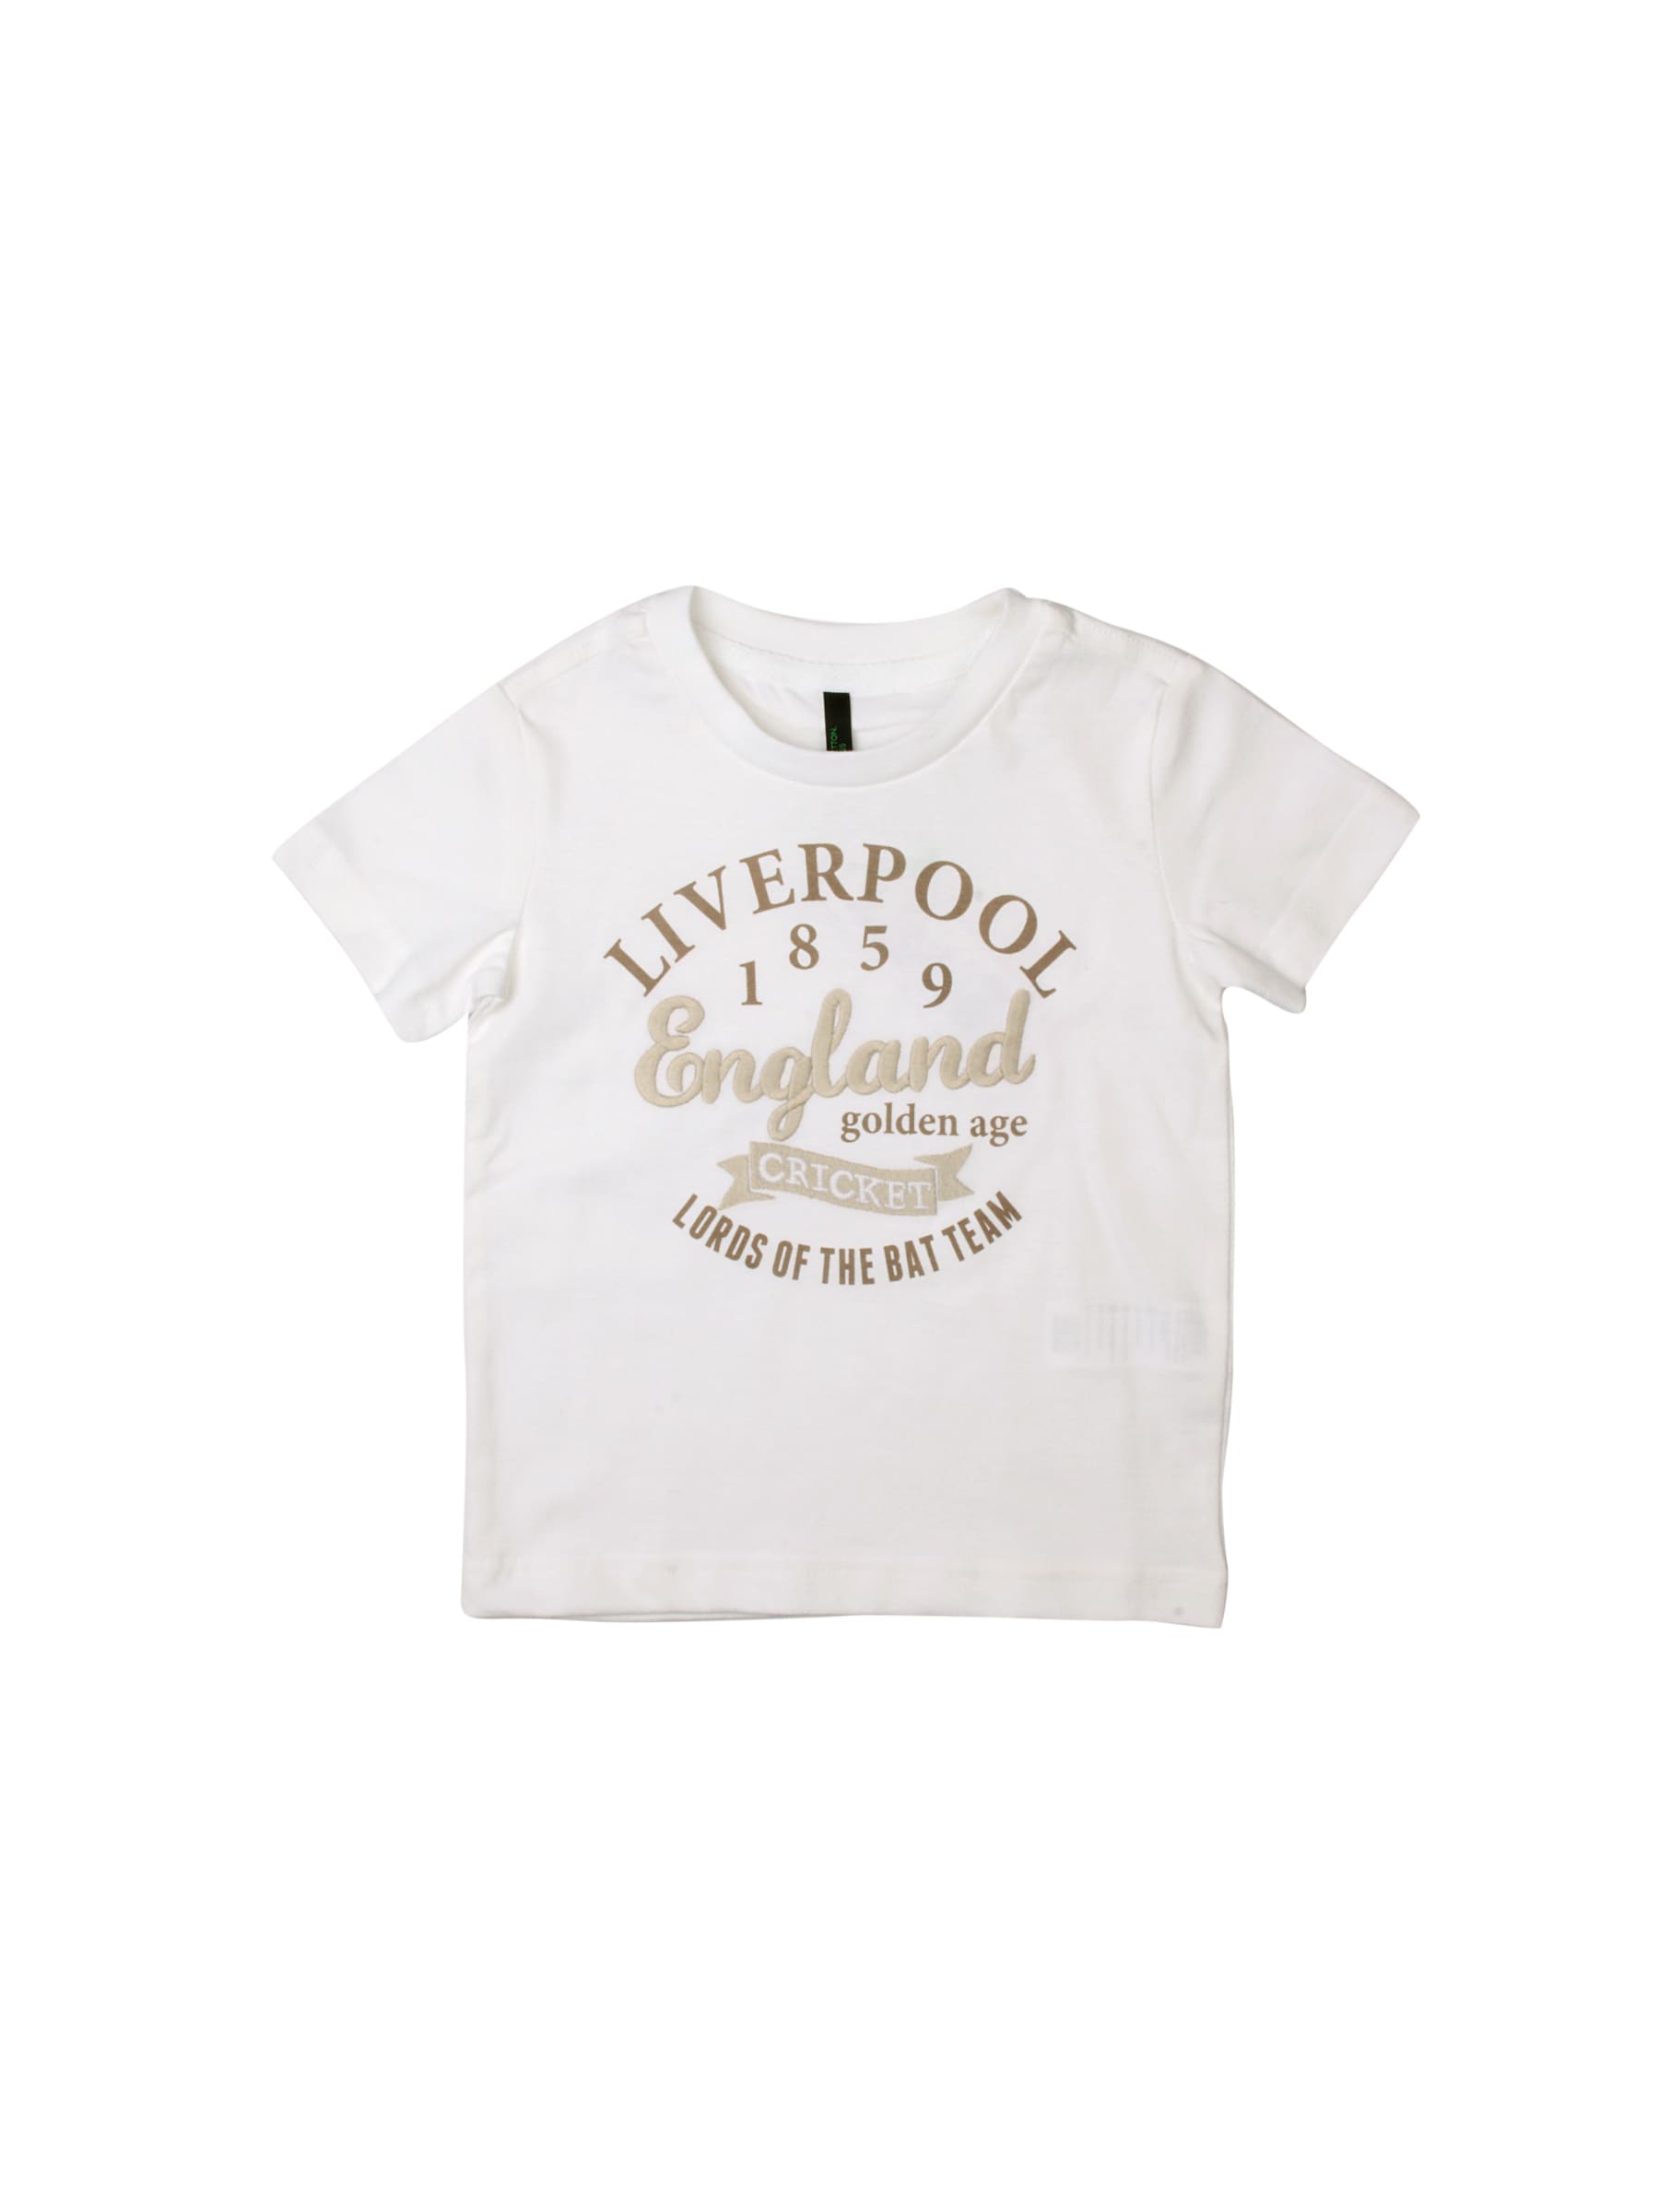 United Colors of Benetton Boys Printed White T-shirt